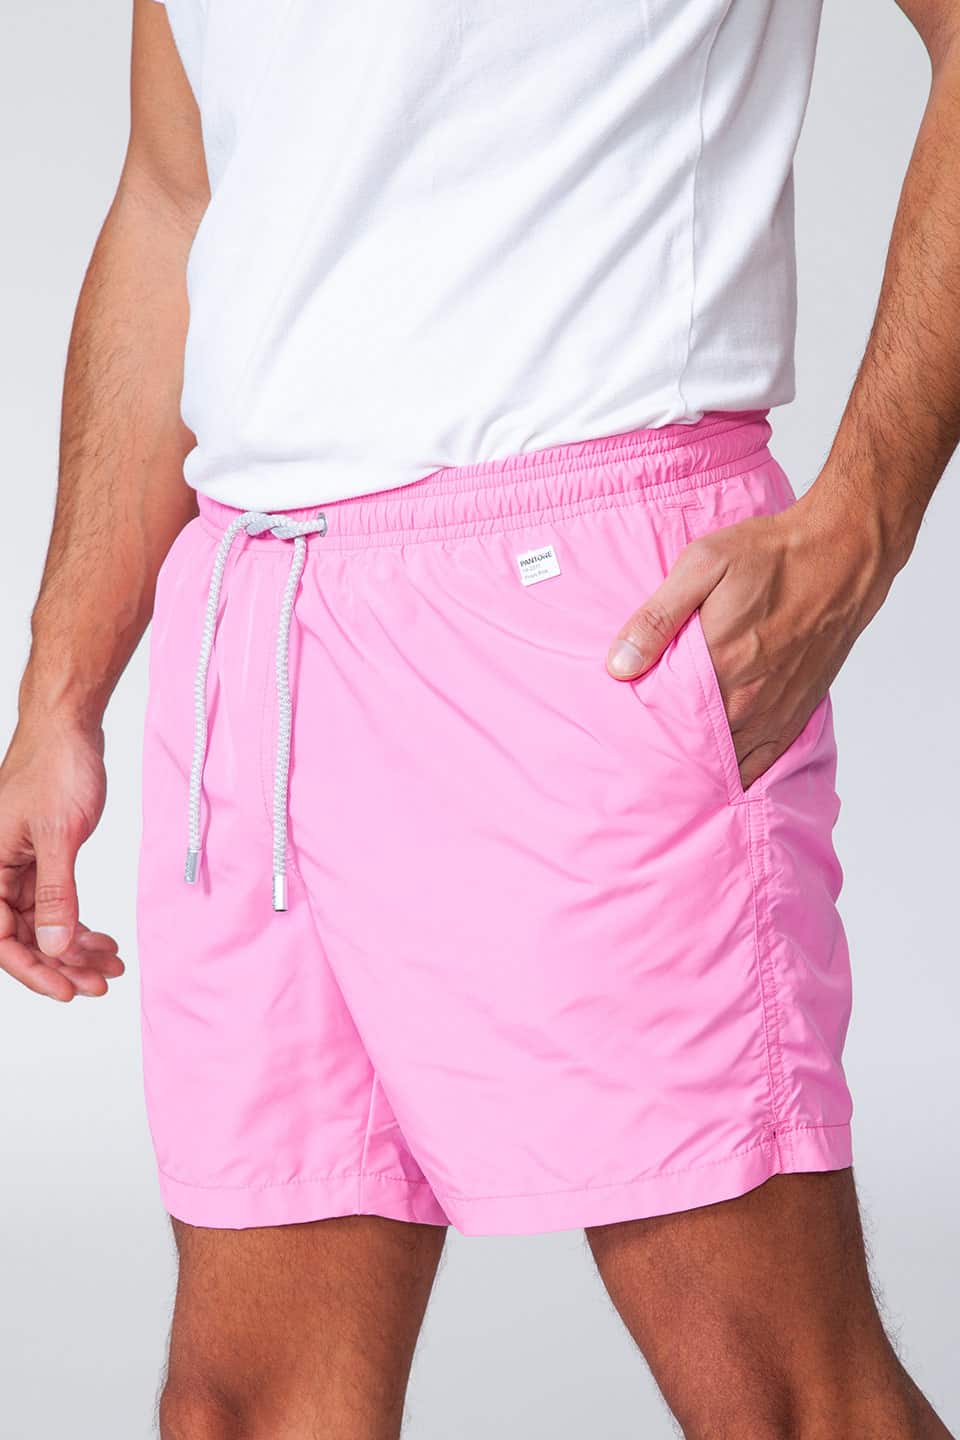 Italian brand swim shorts for men in pink color with pokets